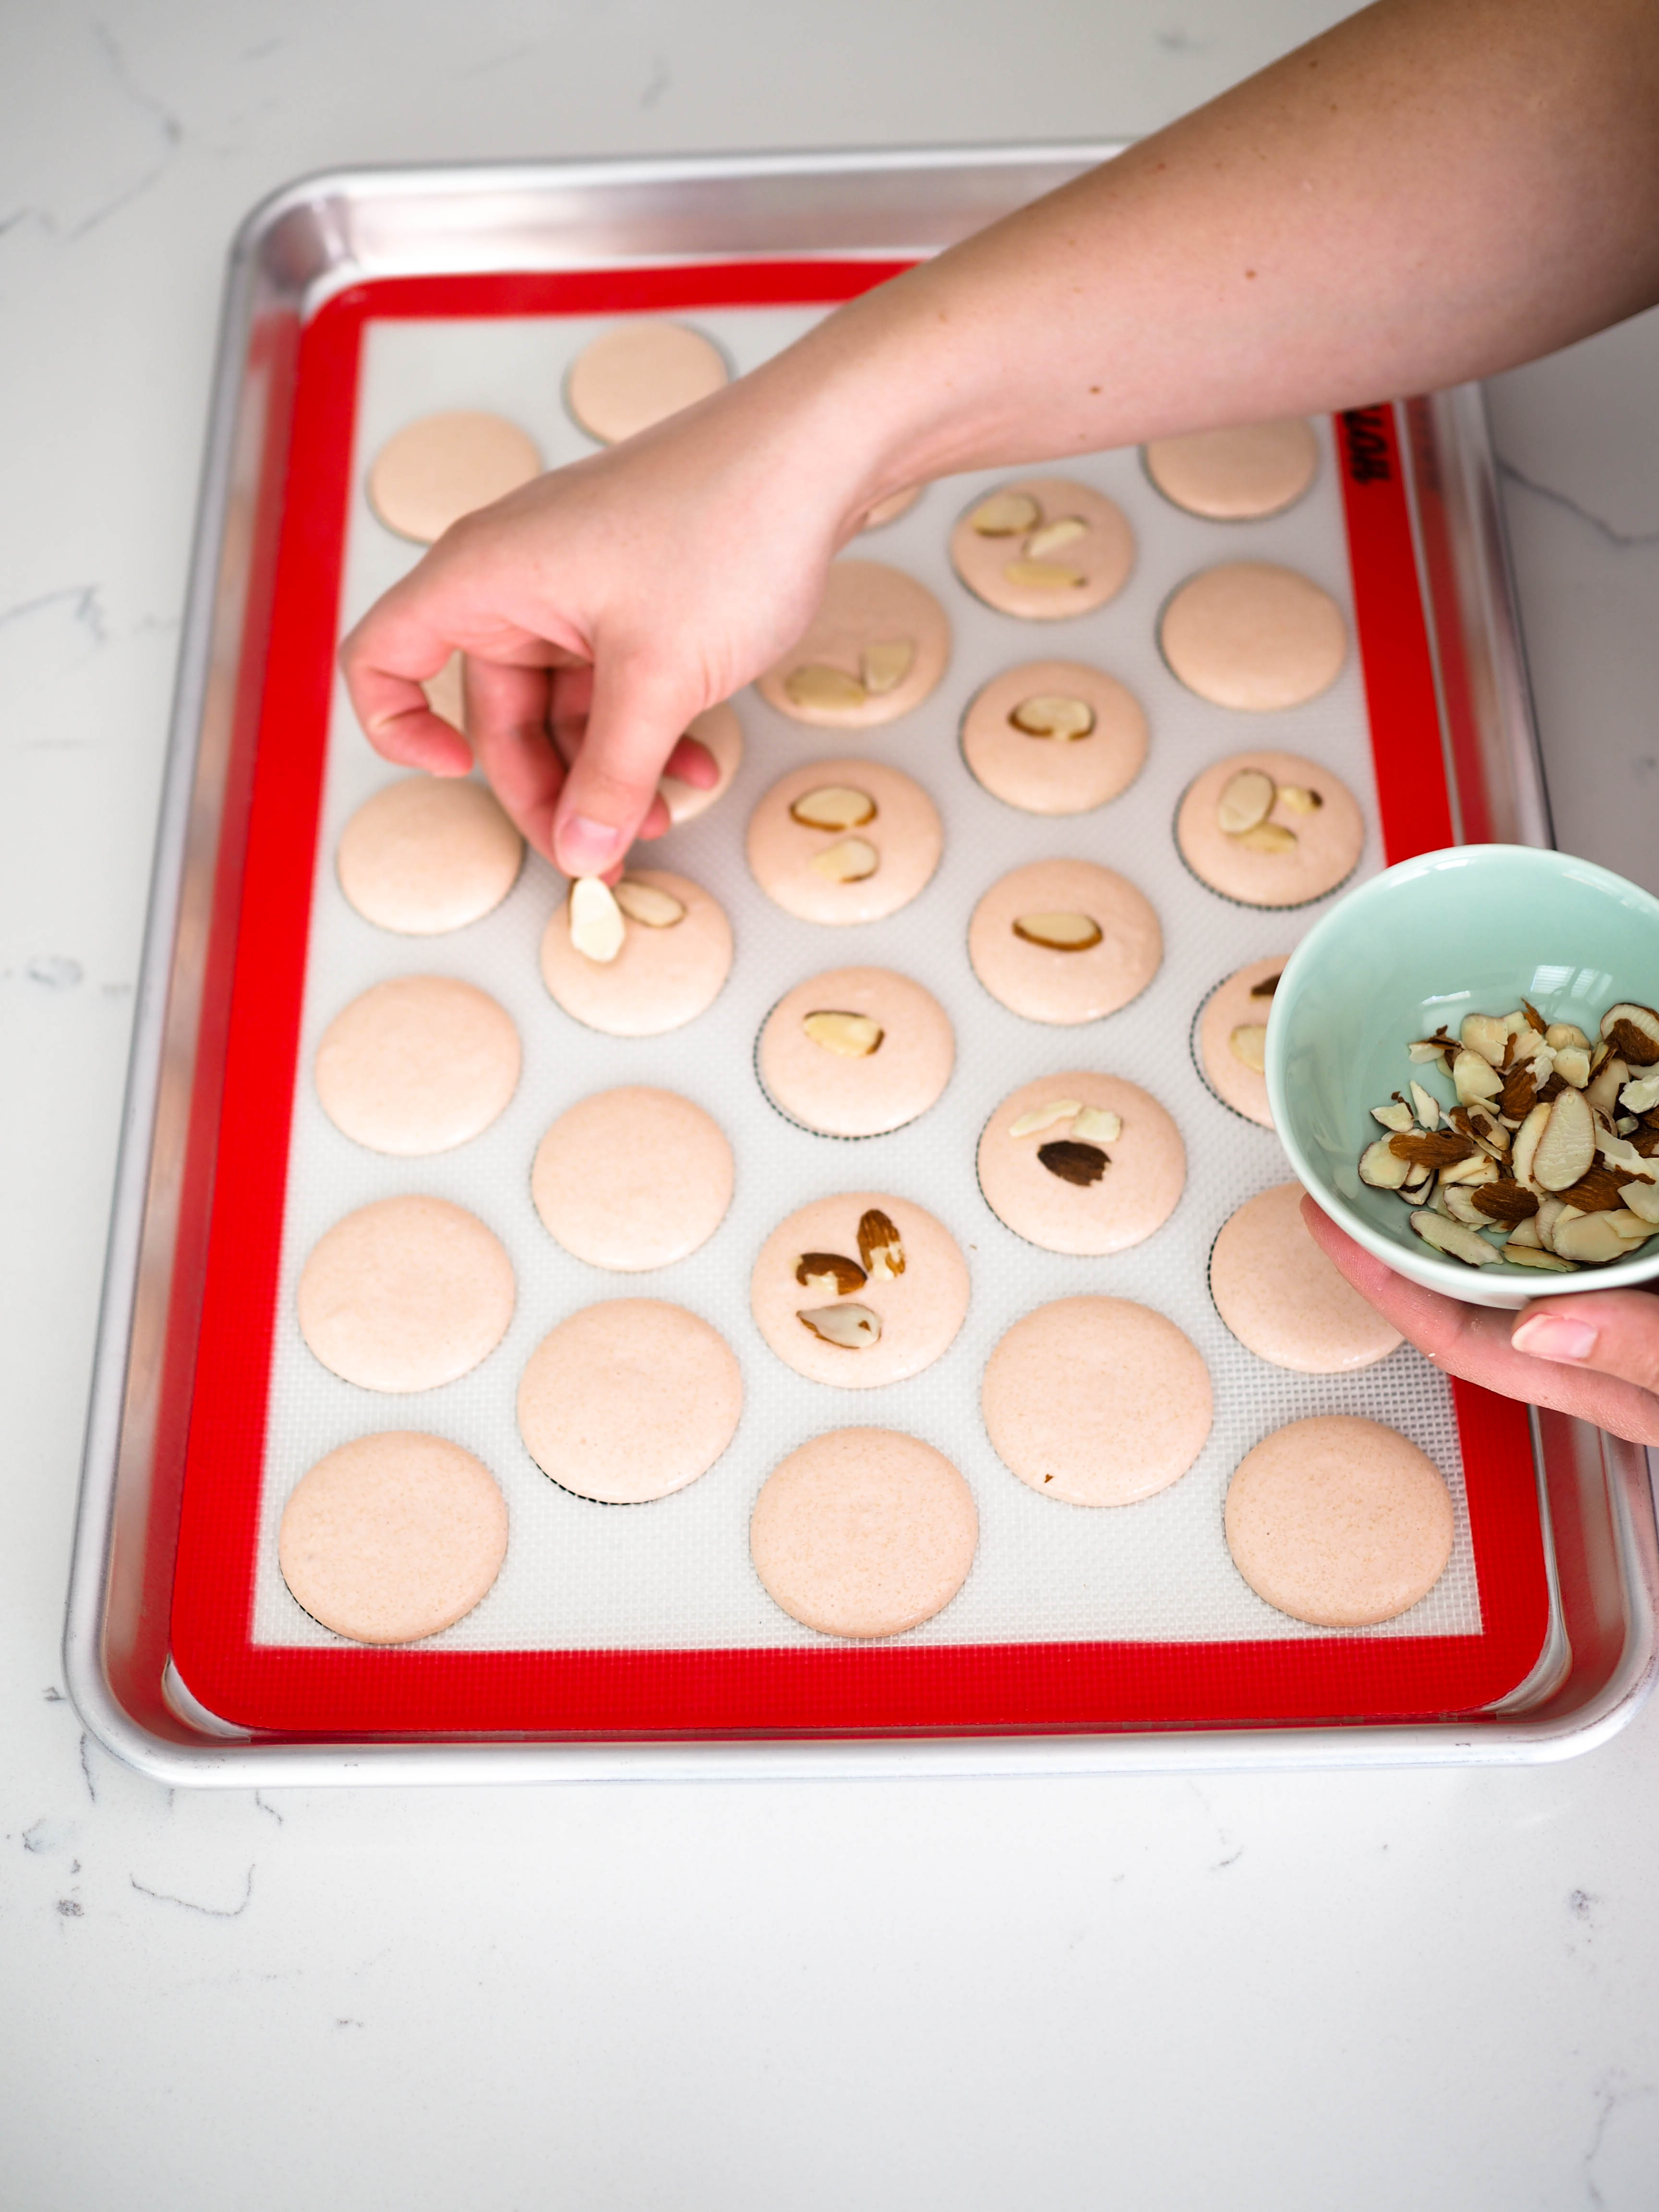 A hand places slices of almonds on top of piped macarons.